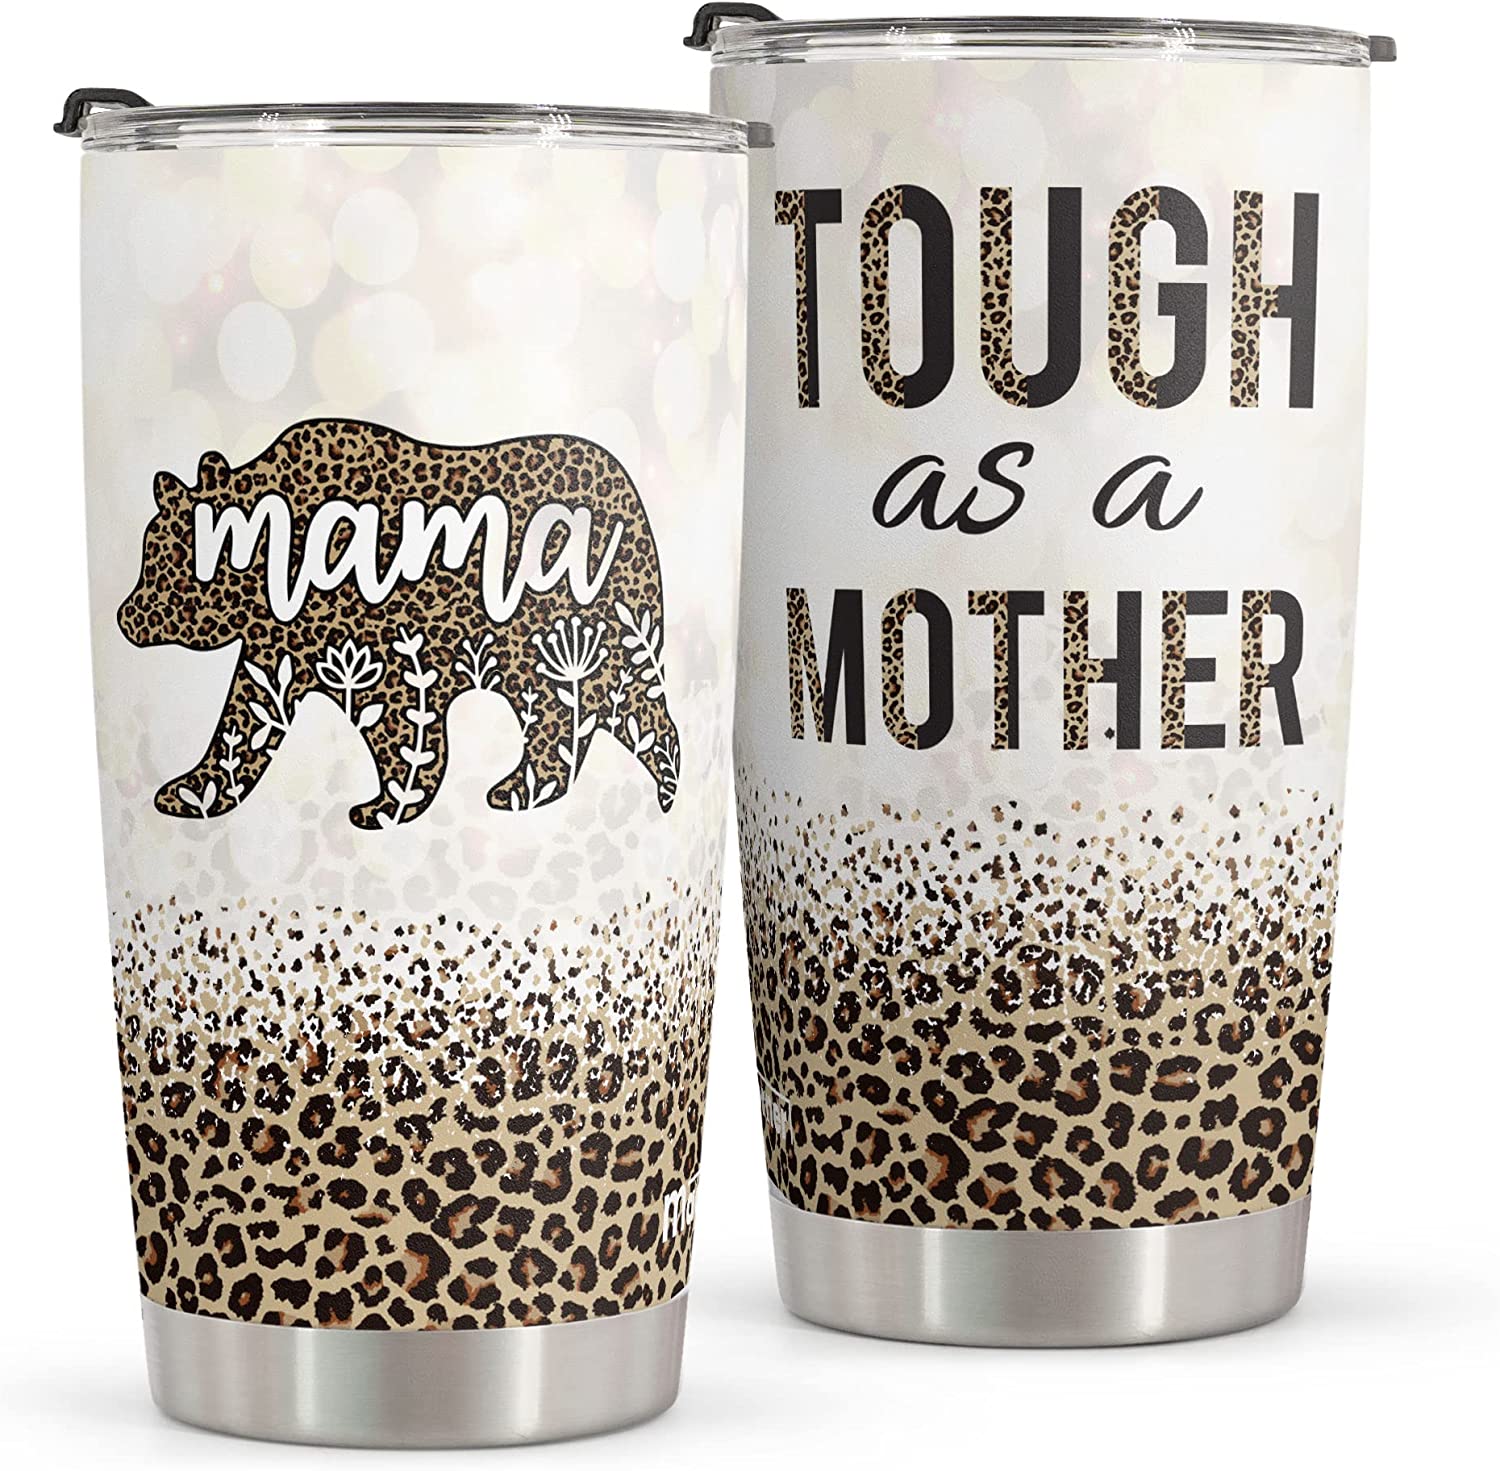 Make Her Smile with the Perfect Mother's Day Gift for Your Sister!